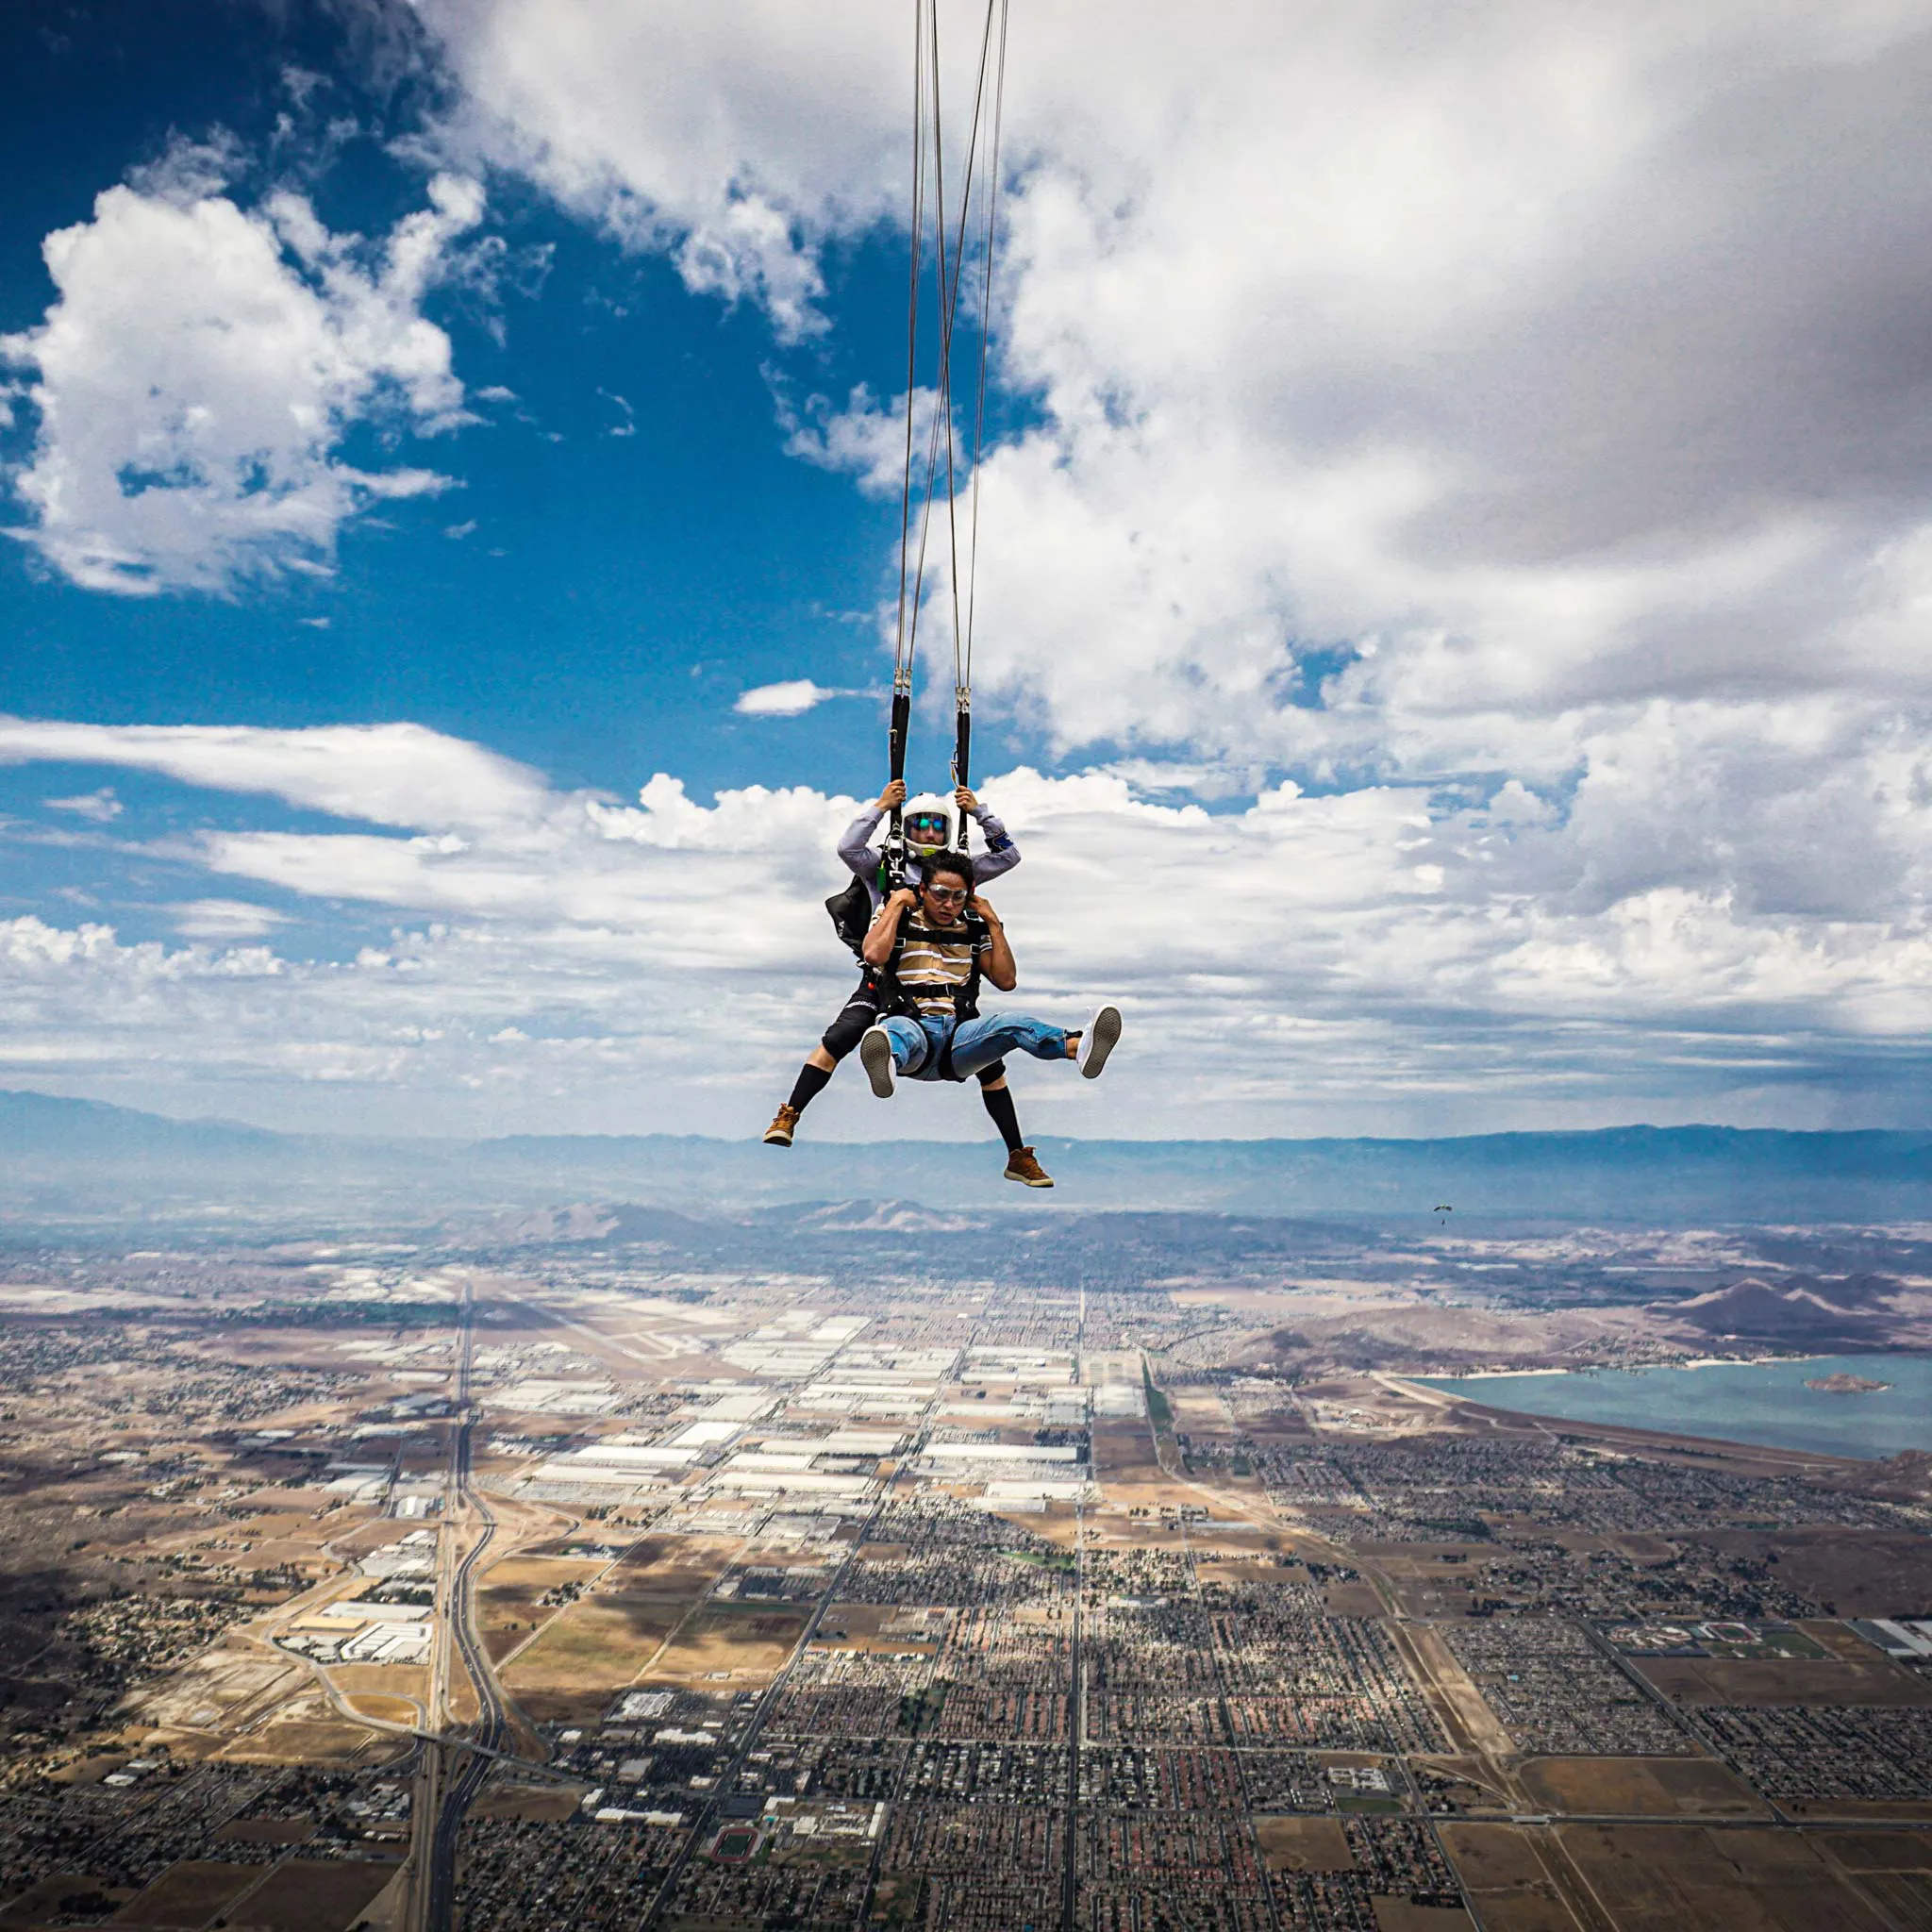 What is static line training, and why is it included in a military